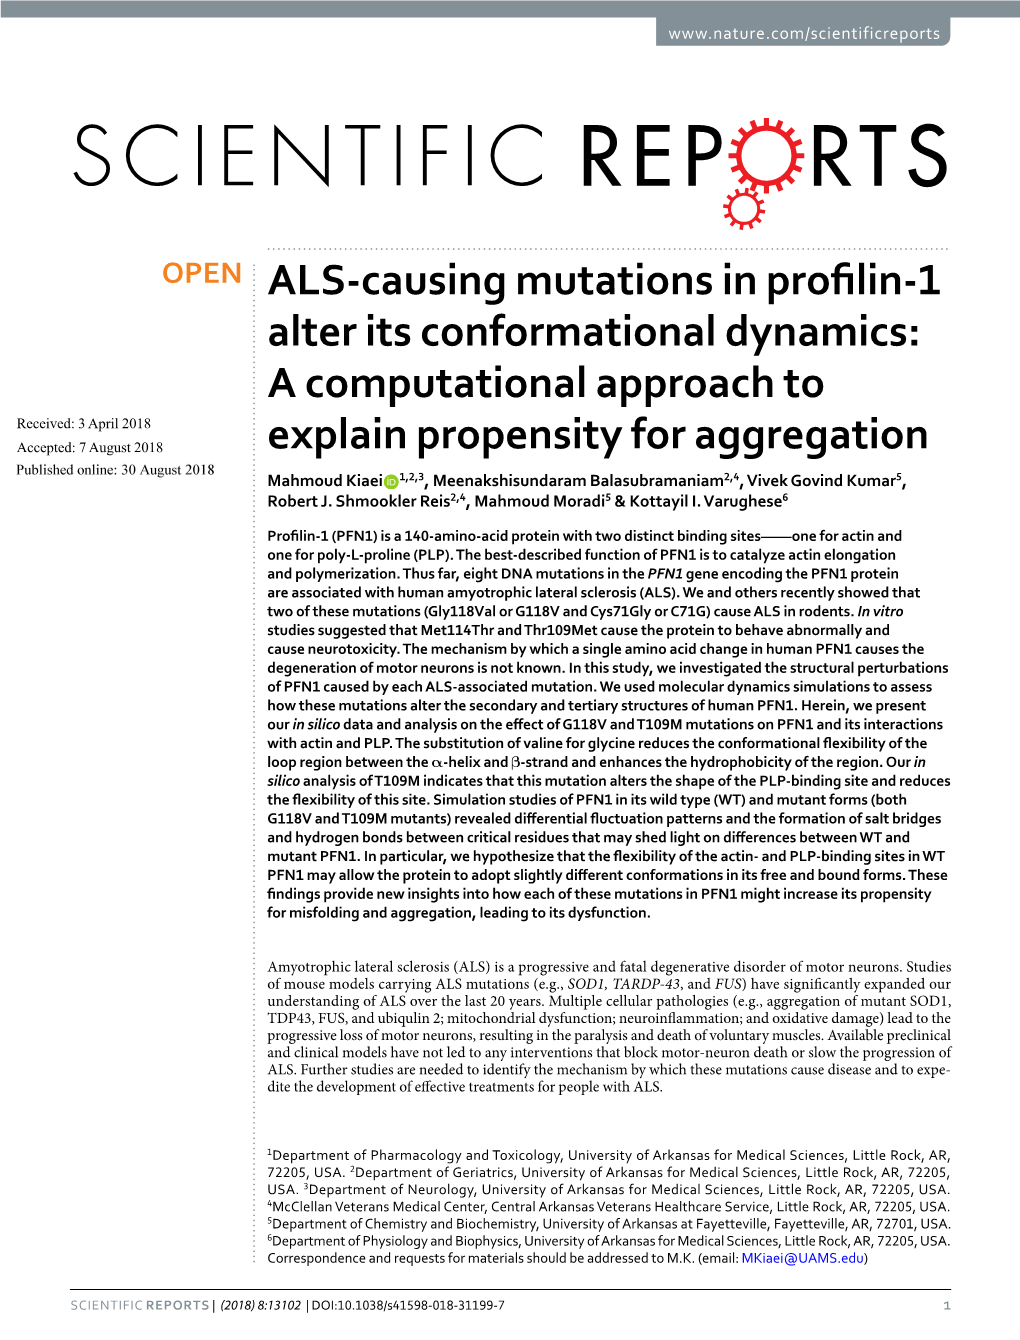 ALS-Causing Mutations in Profilin-1 Alter Its Conformational Dynamics